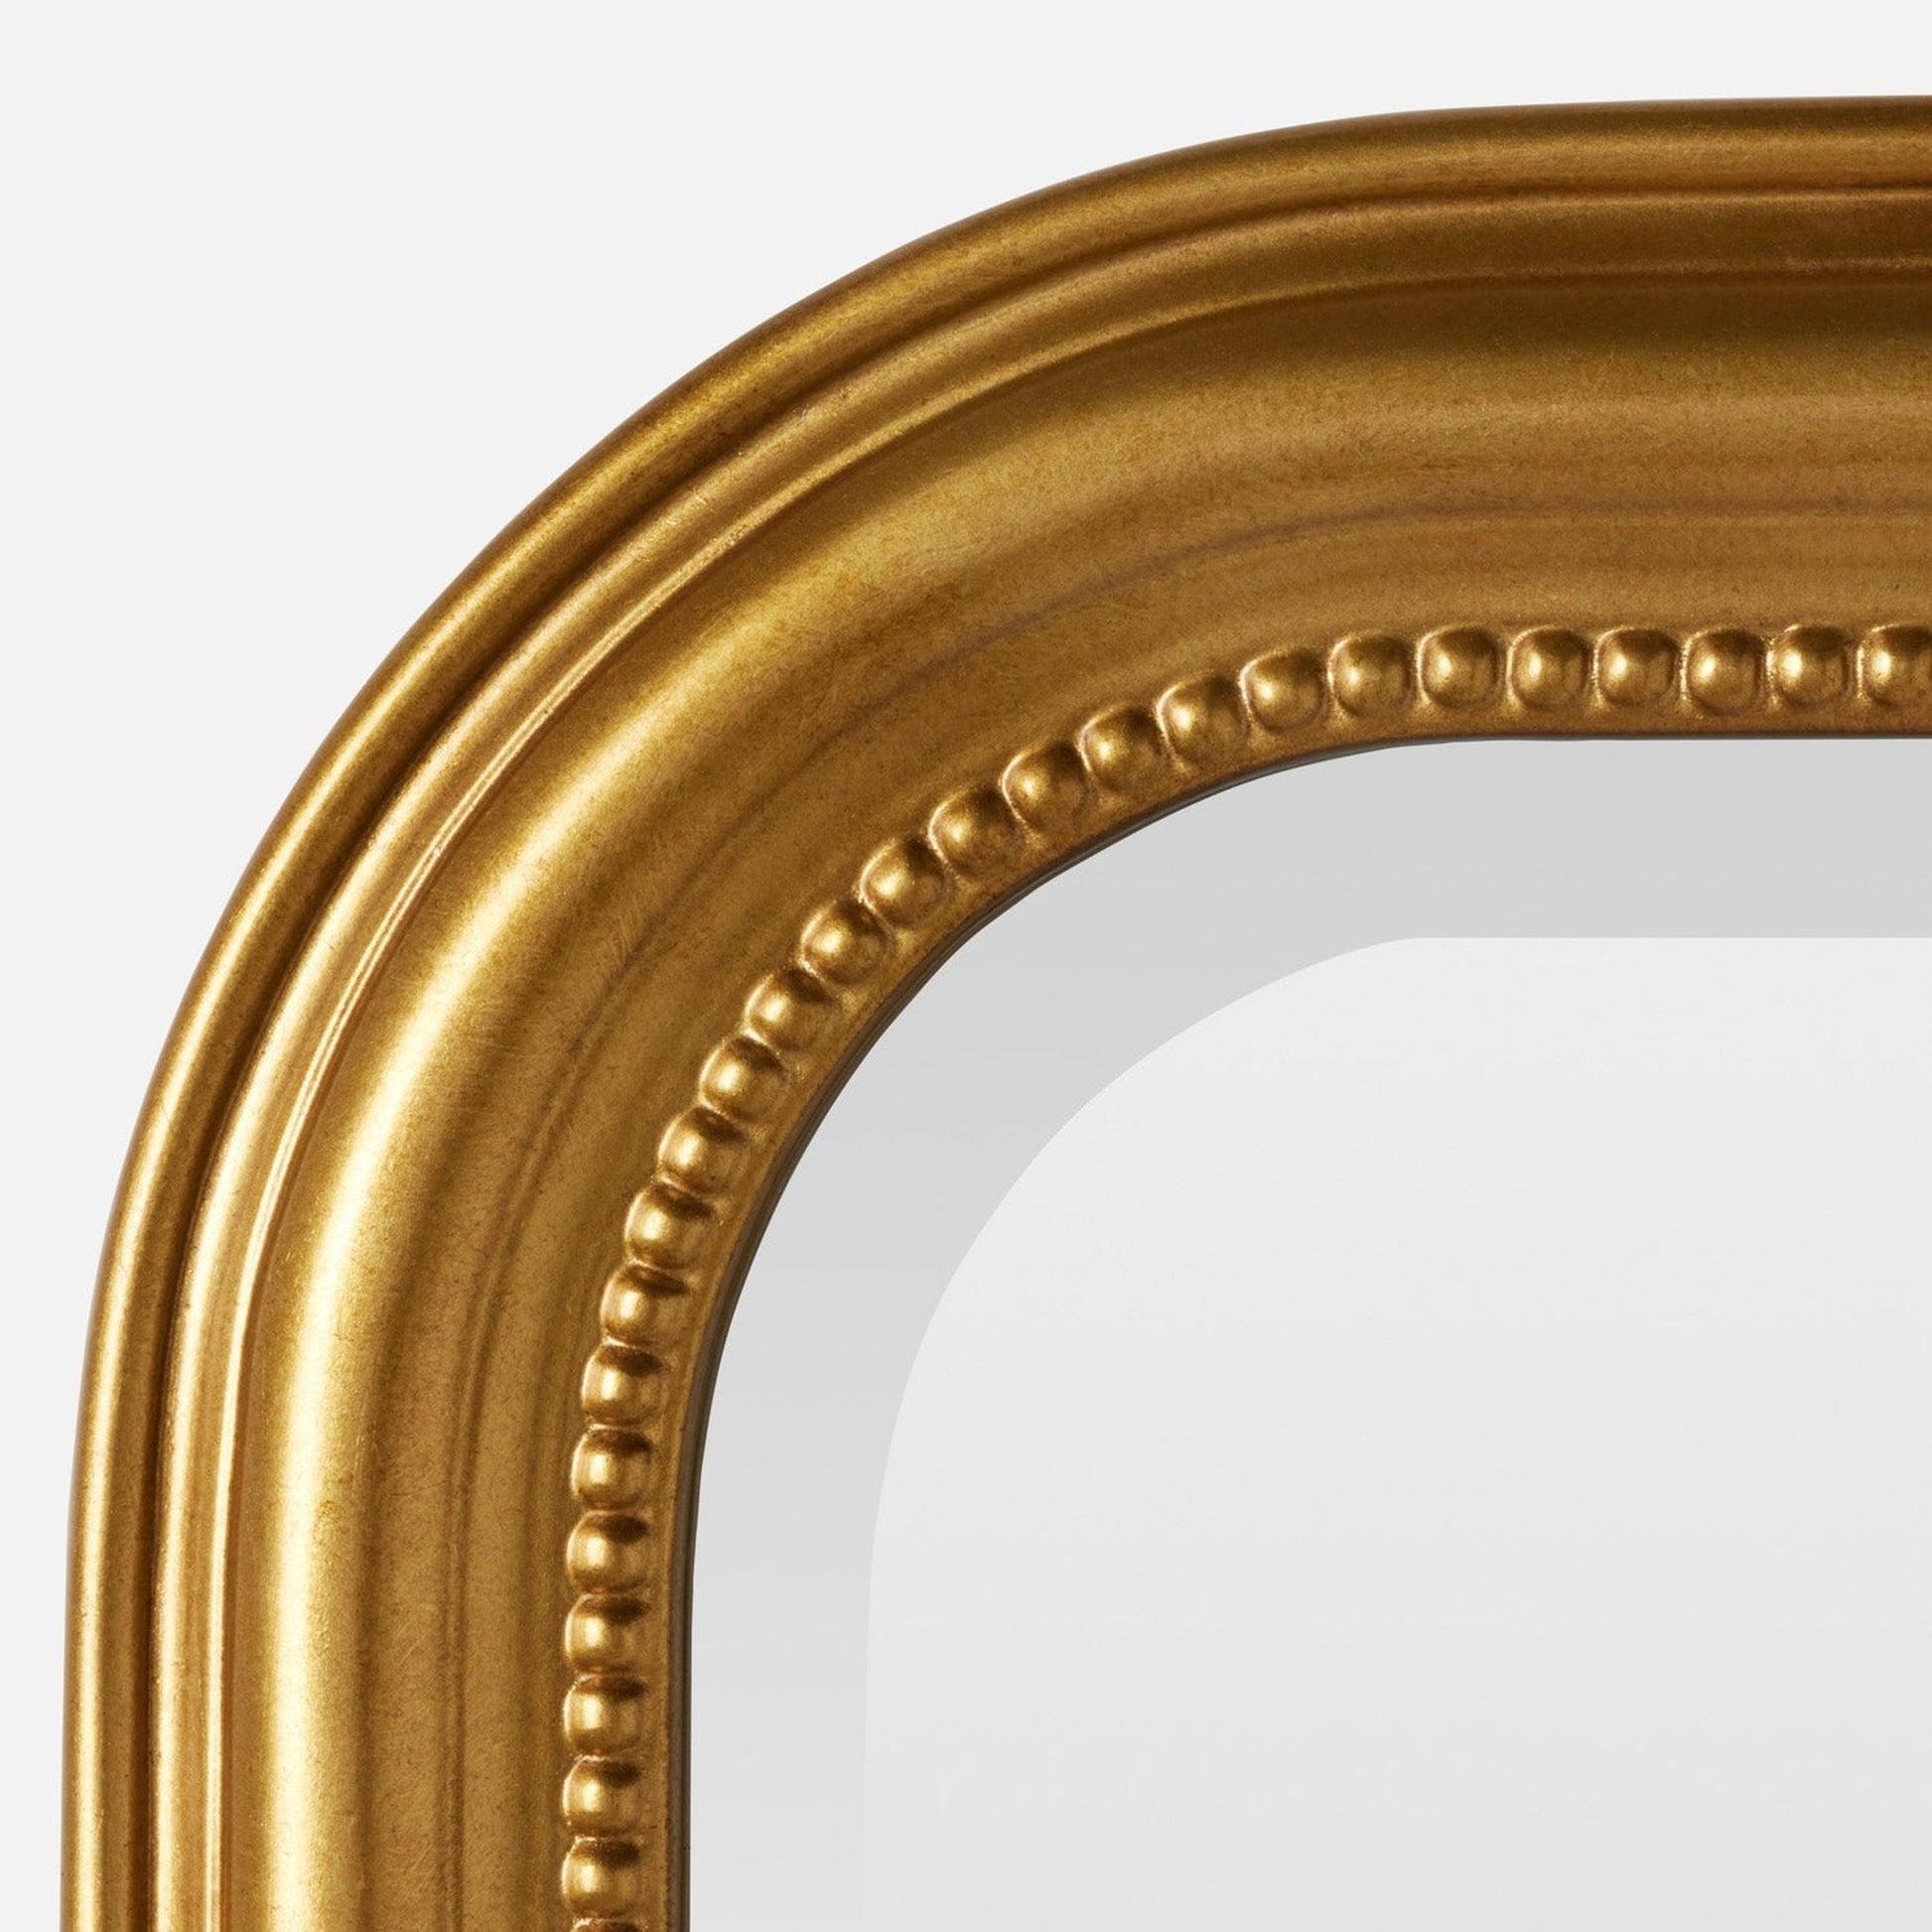 Made Goods Phillipe 26" x 38" Arch Gold Leaf Wood Mirror